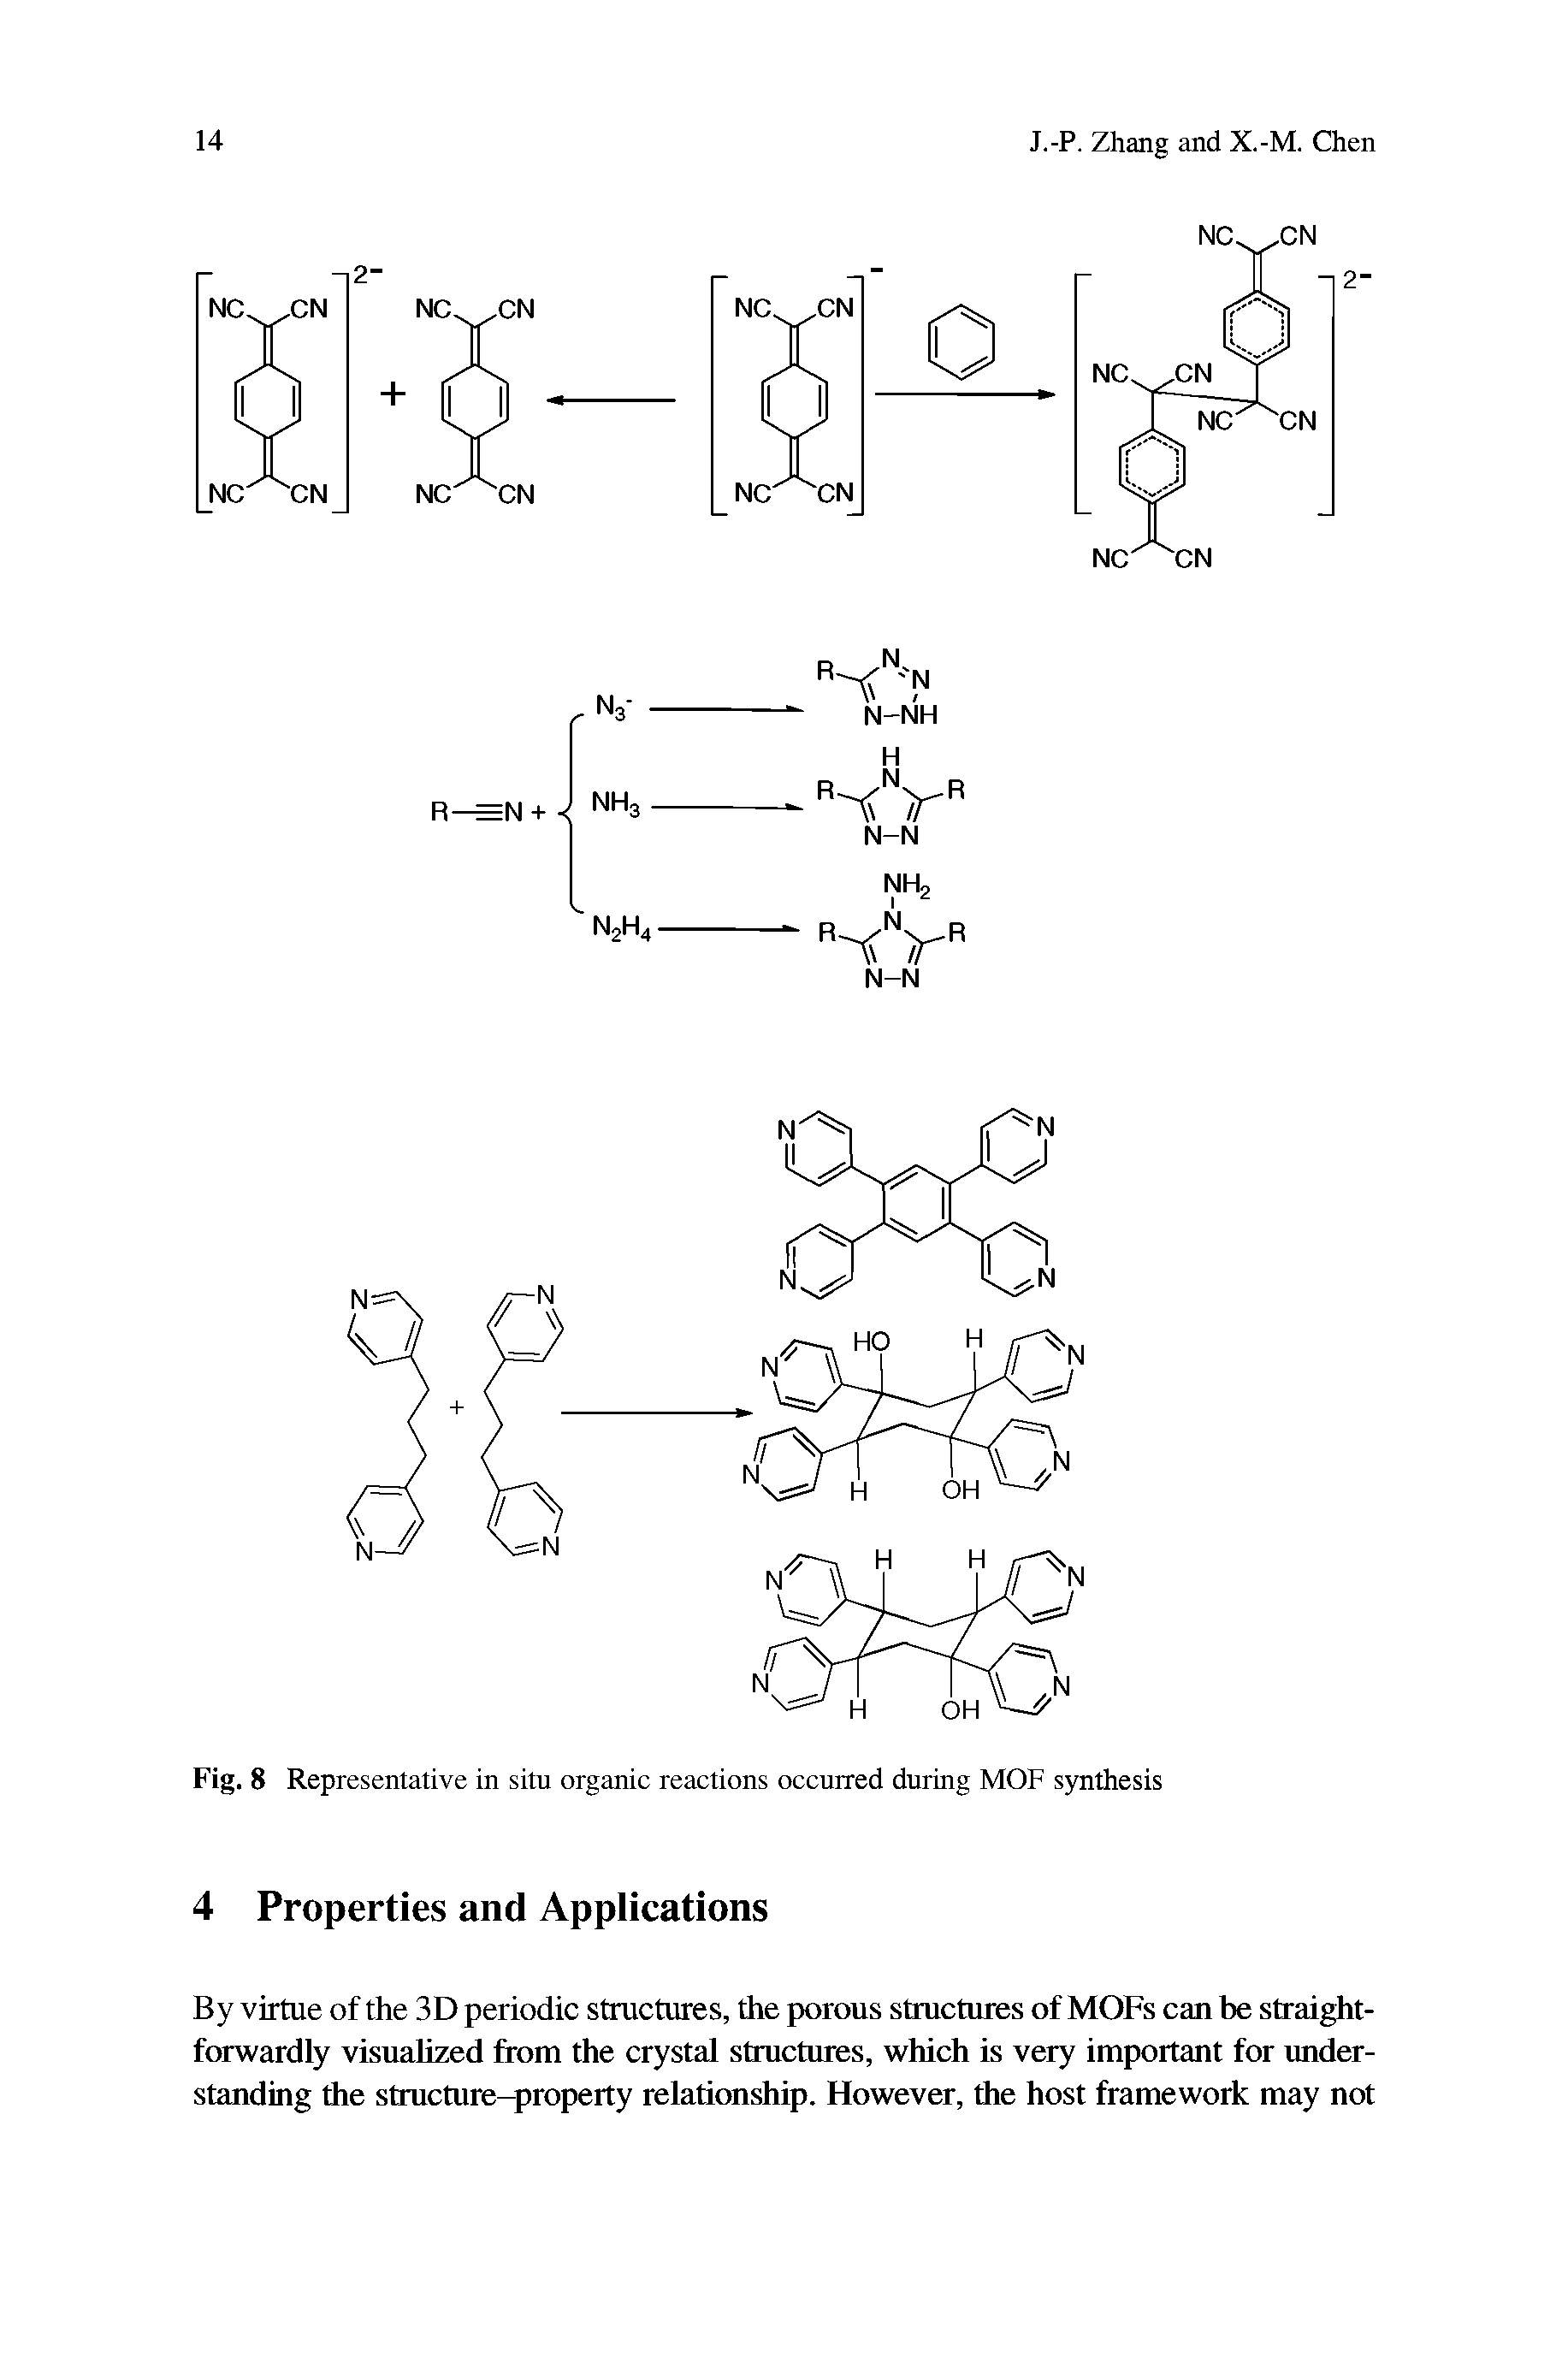 Fig. 8 Representative in situ organic reactions occurred during MOF synthesis...